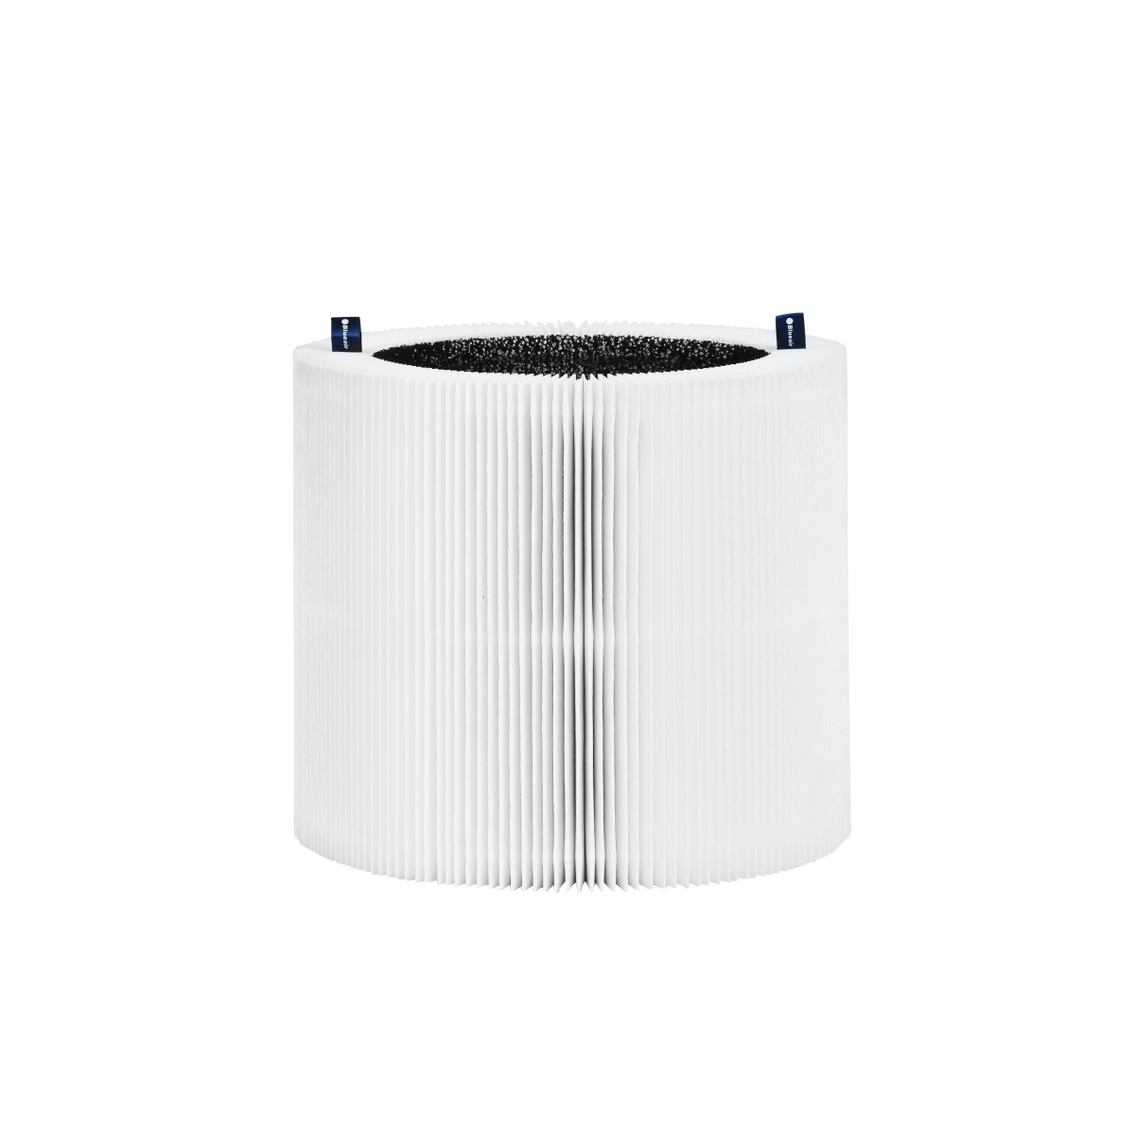 Blueair HEPA Replacement Filter for 311i Plus Max Air Purifier